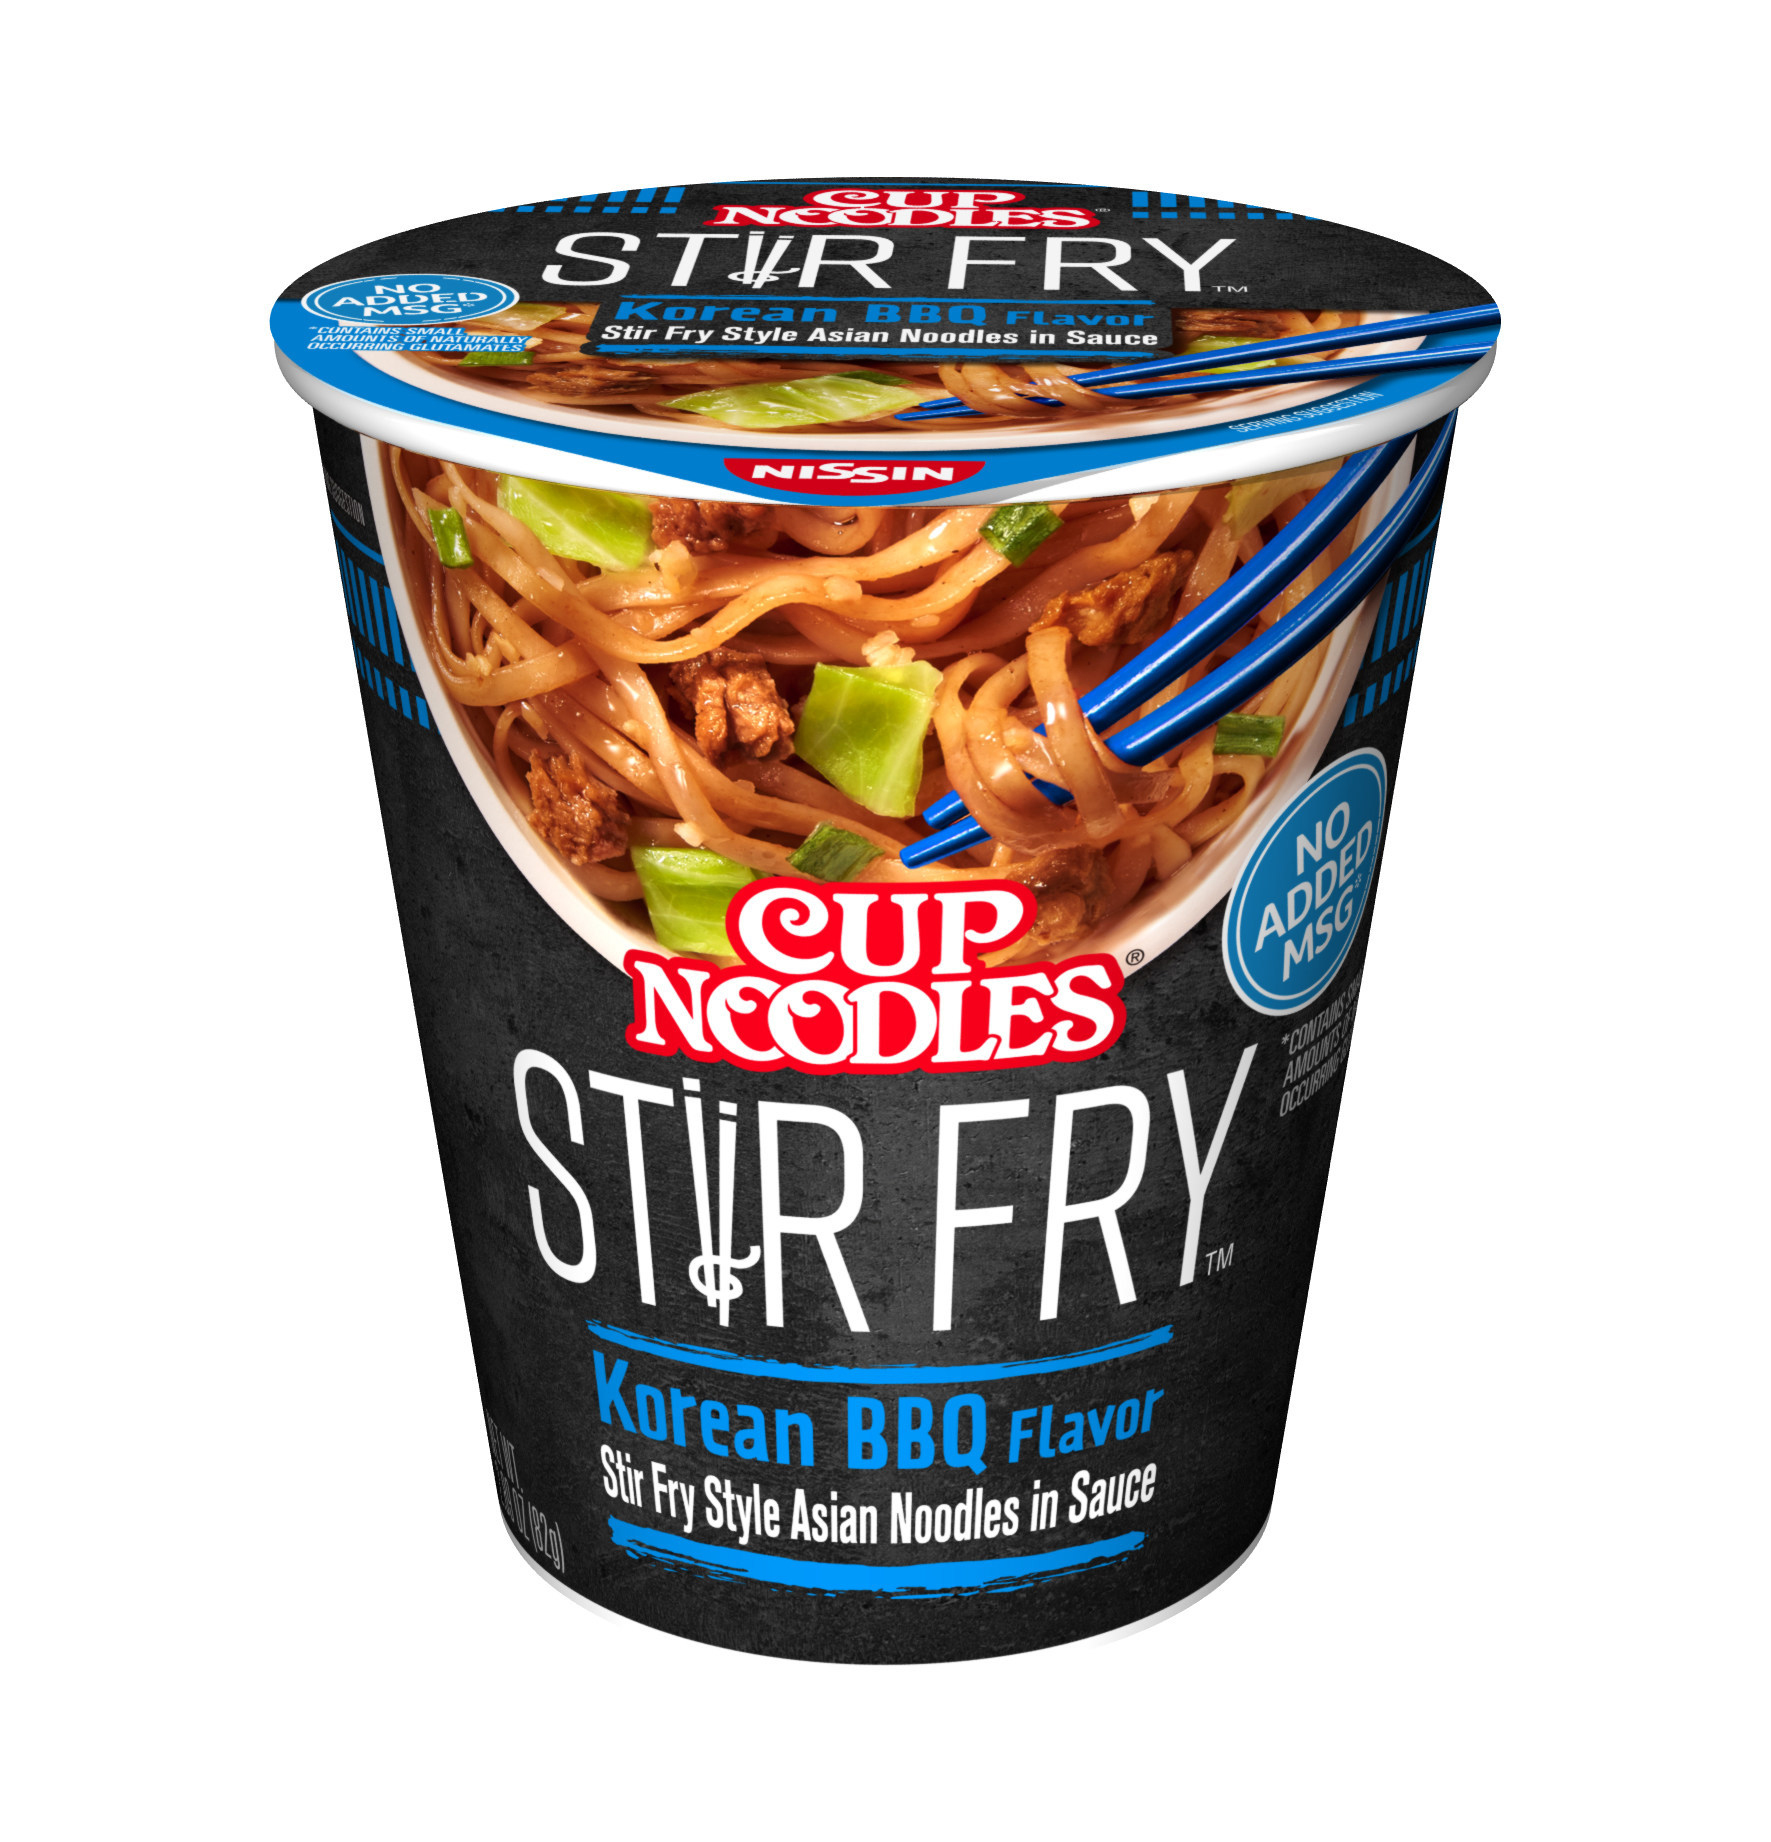 Nissin Foods Launches Cup Noodles Stir Fry, Soupless Take on Cup Noodles